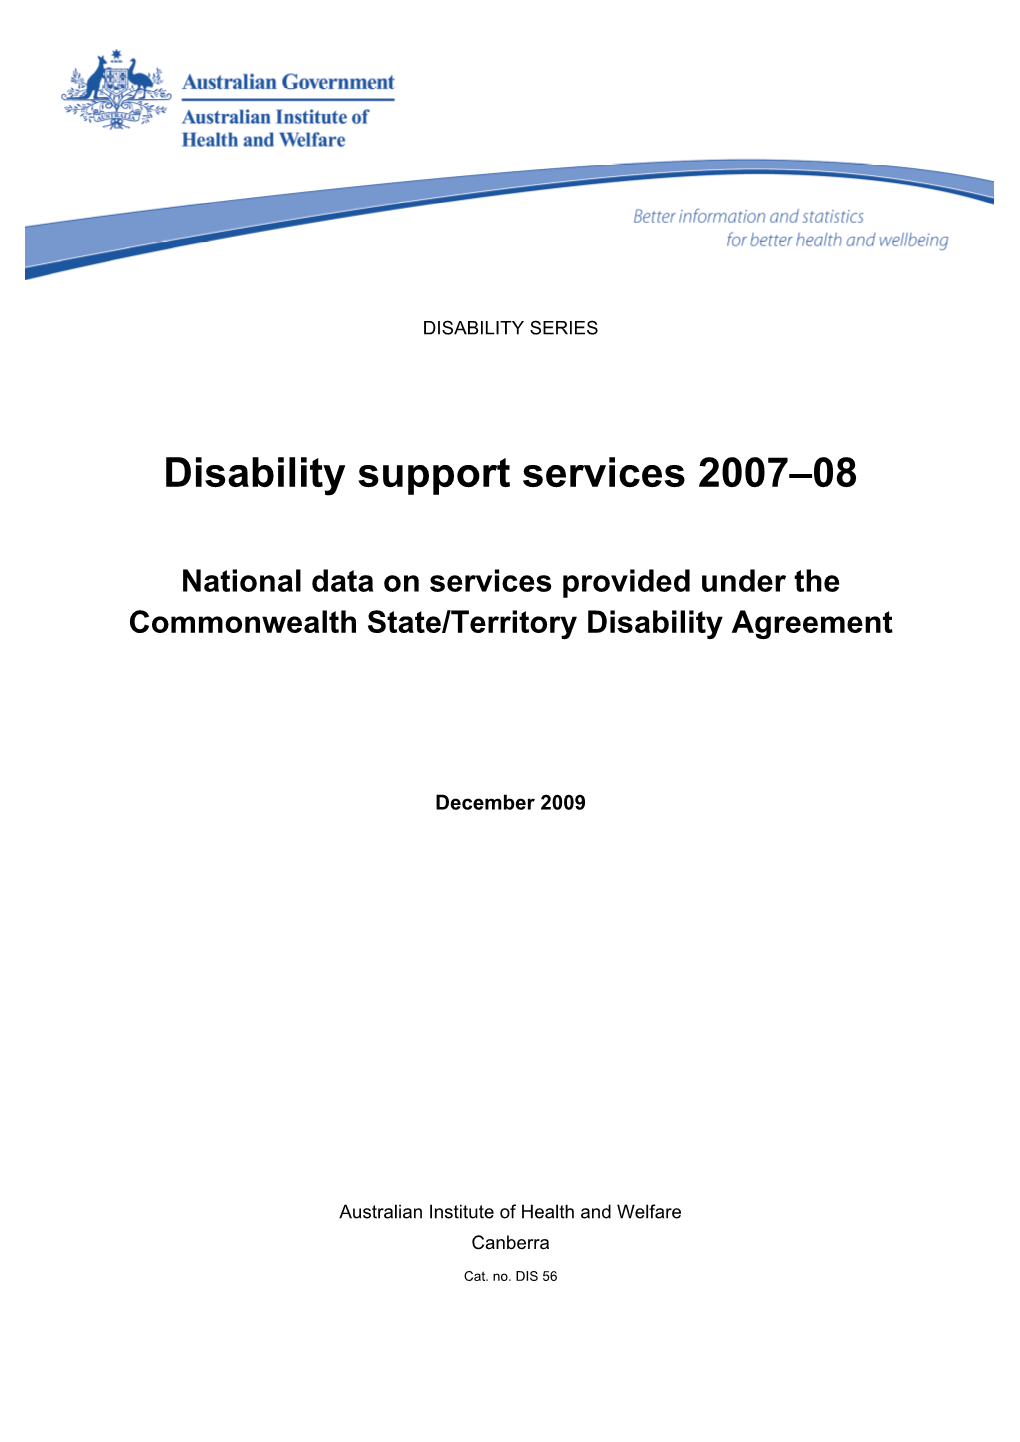 Disability Support Services 2007-08: National Data on Services Provided Under the Commonwealth State/Territory Disability Agreem